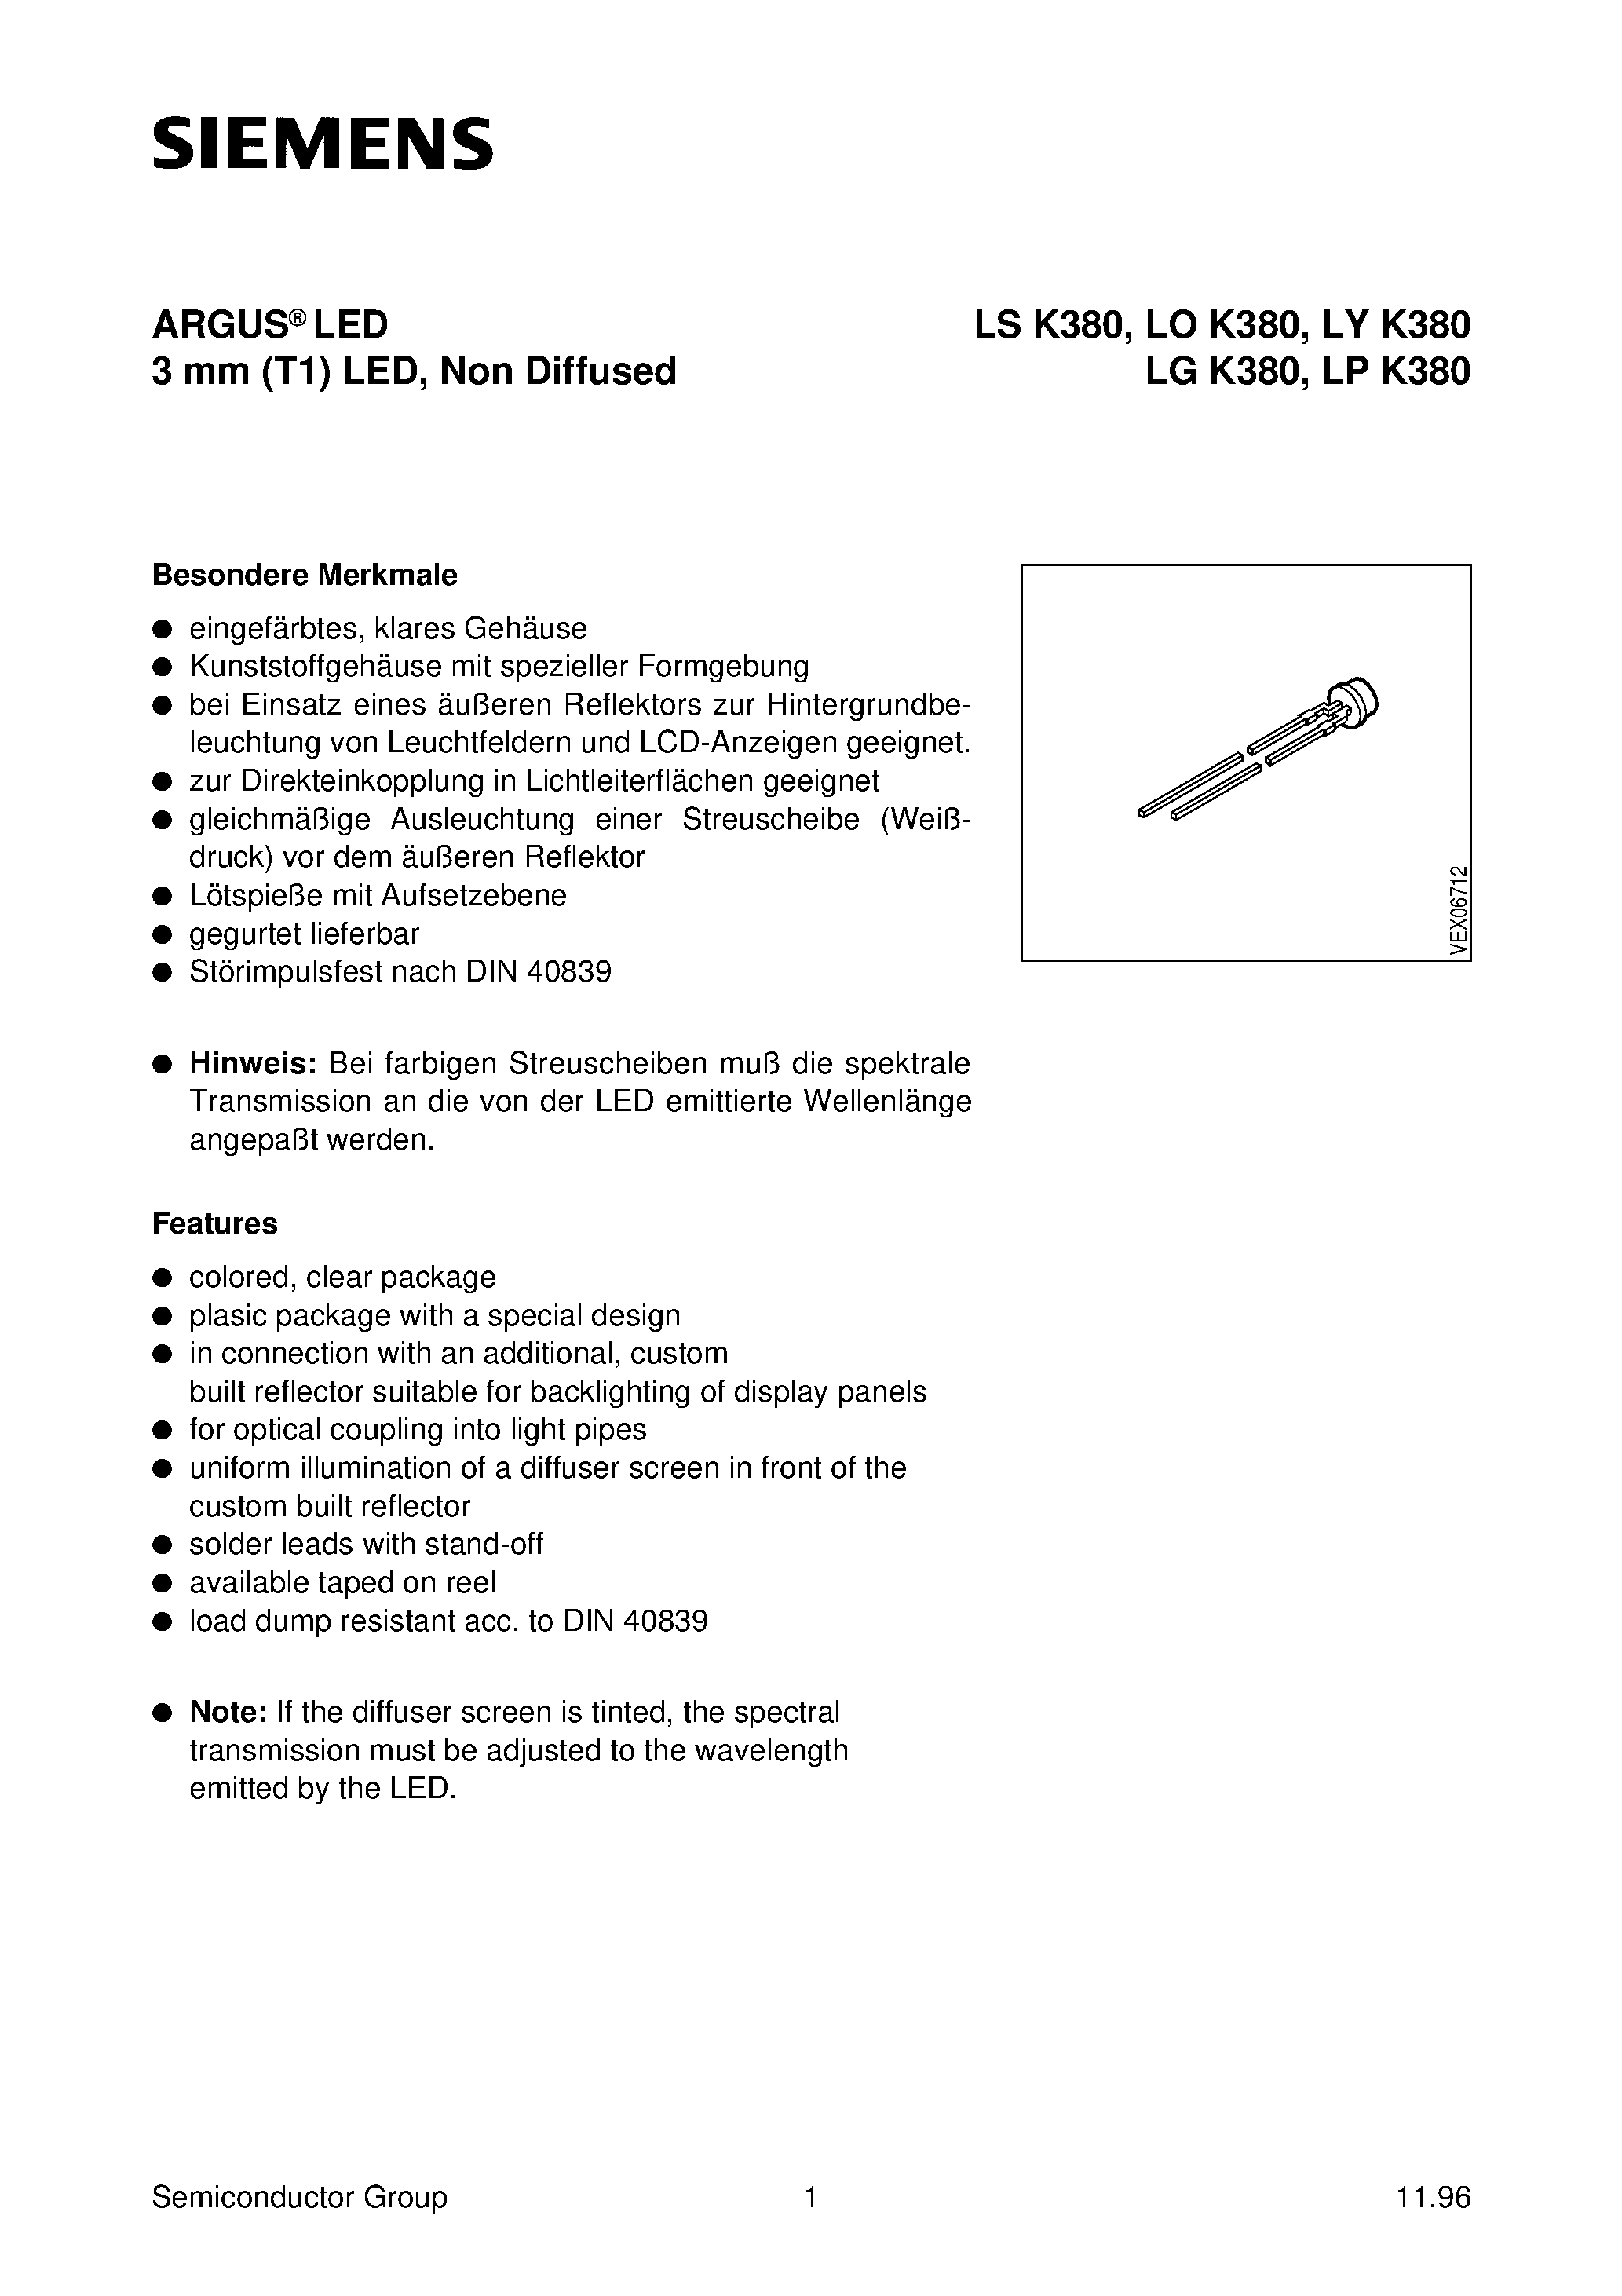 Datasheet LYK380-N - ARGUS LED 3 mm T1 LED/ Non Diffused page 1